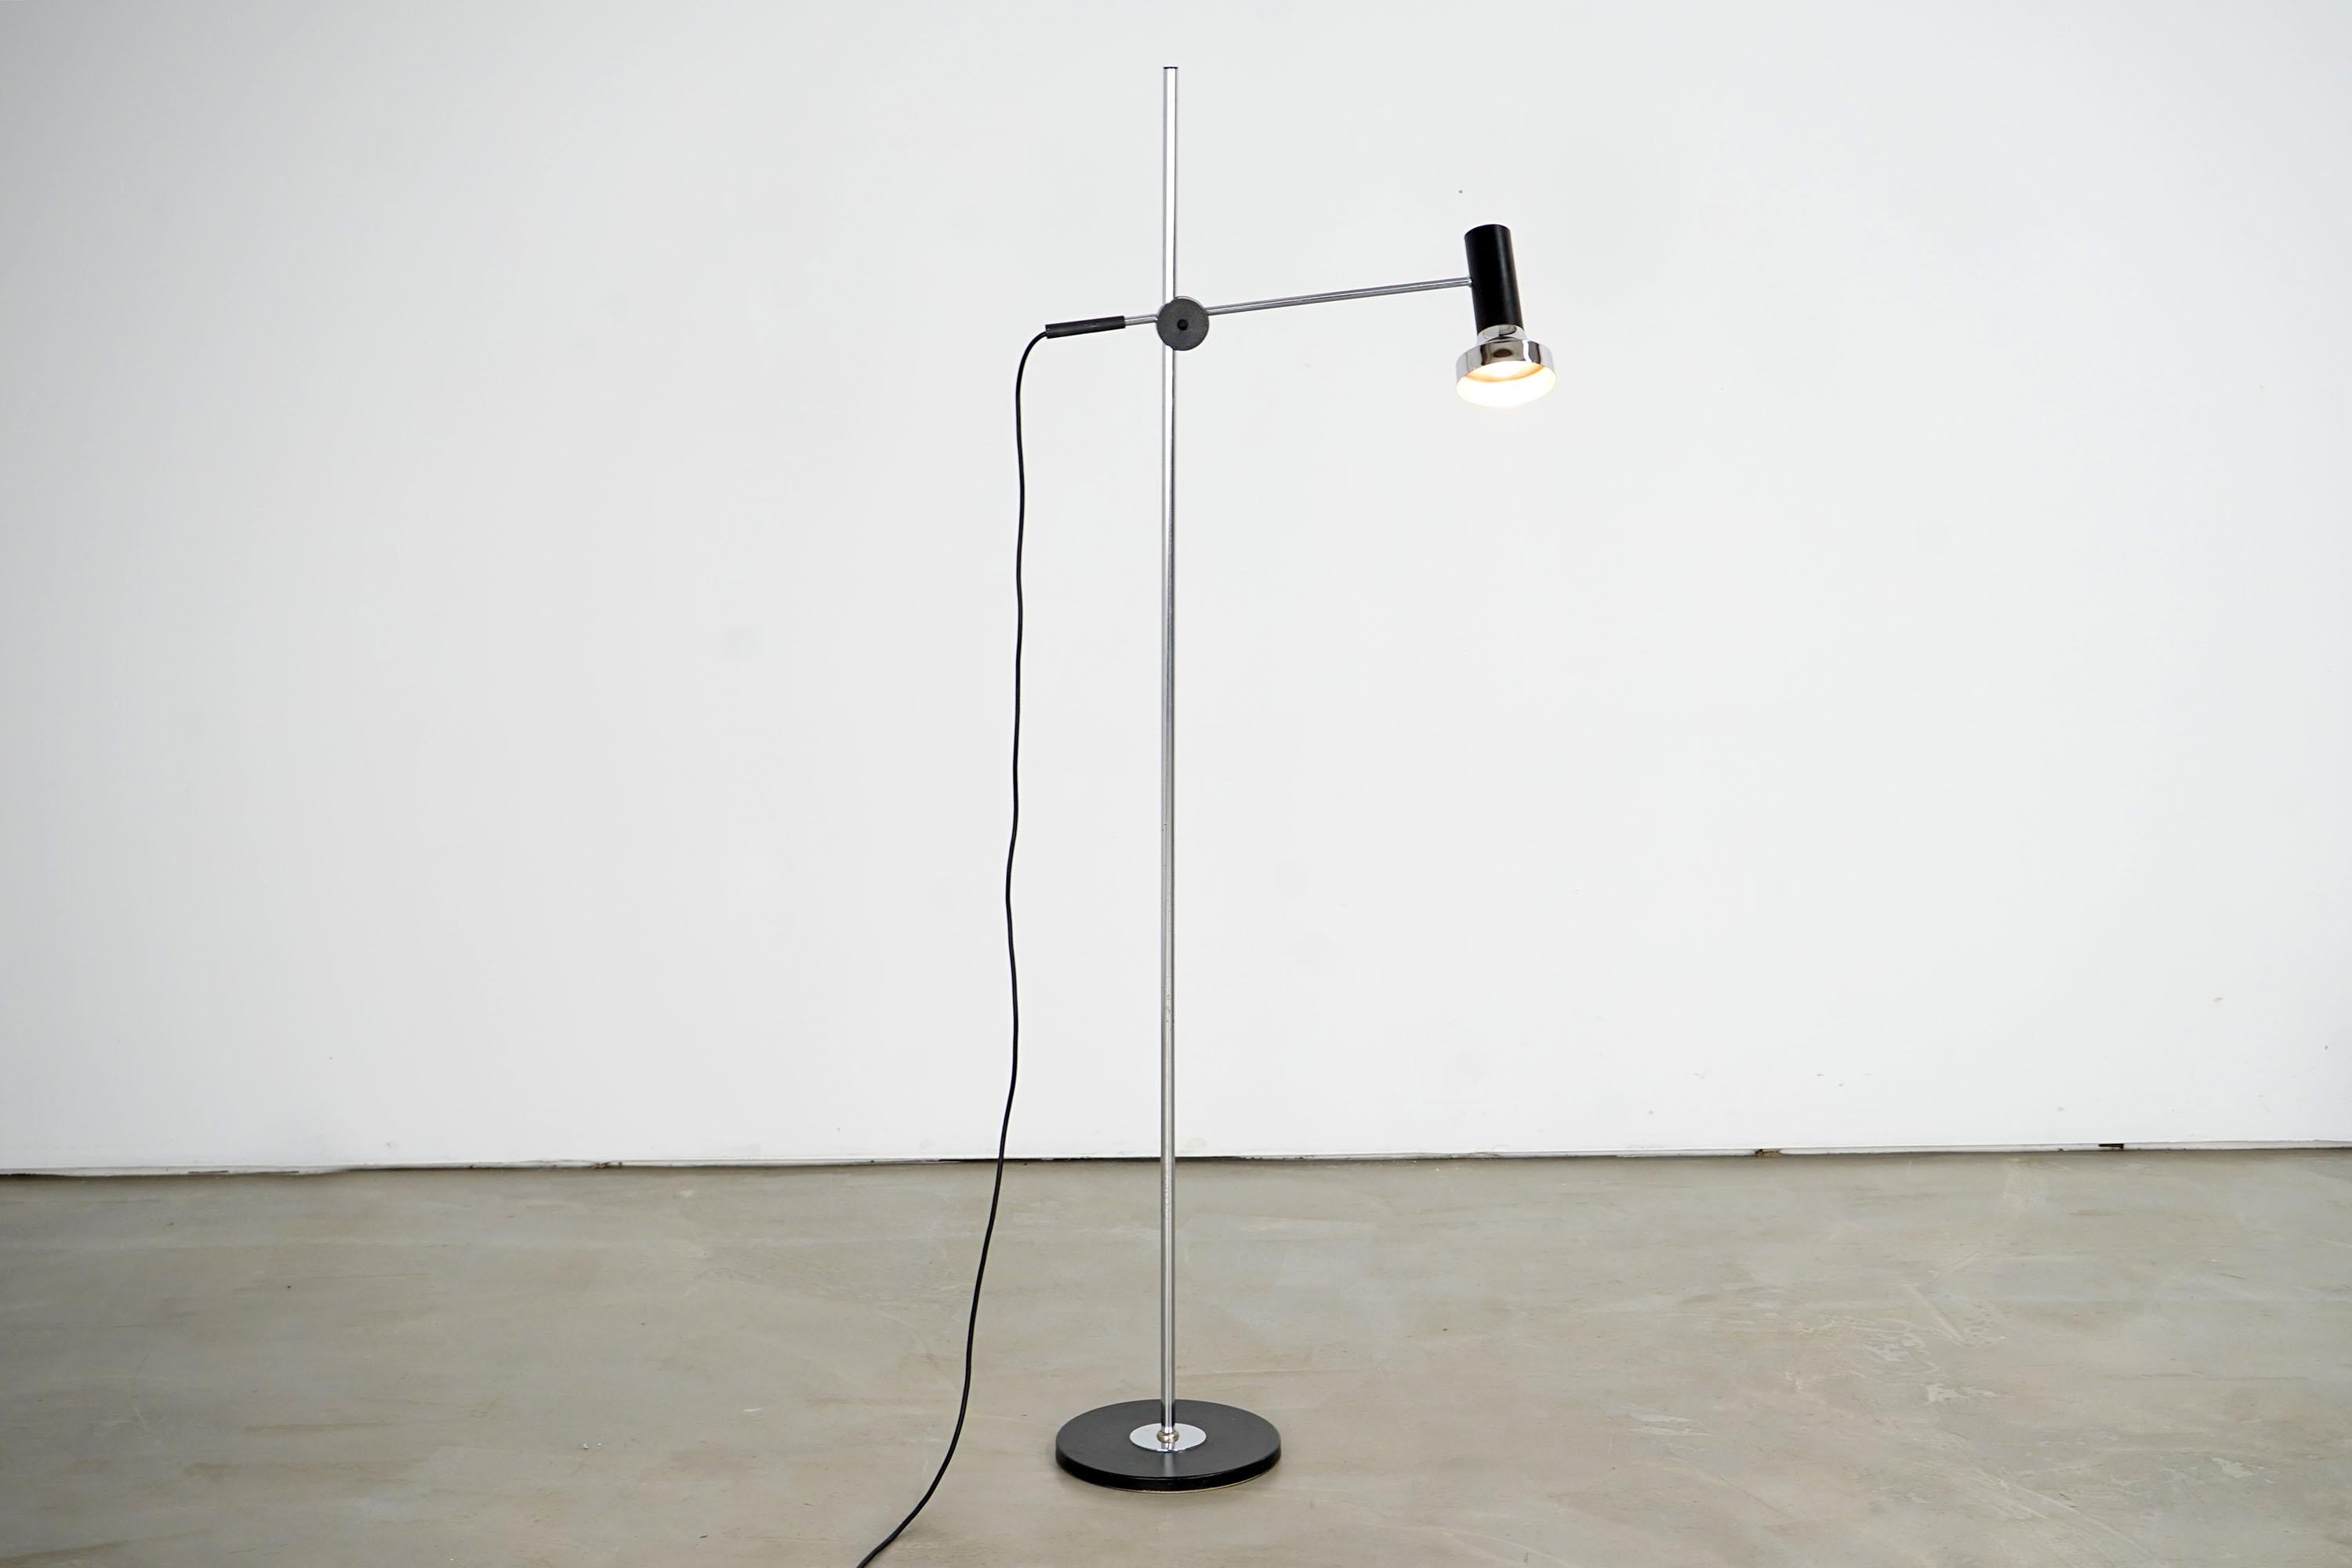 The minimalistic floor lamp dates back to the 1970s. The piece is made of steel, individual elements were chrome-plated. The floor lamp is height adjustable, the shade can be flexibly swiveled. The lamp is in very good condition.